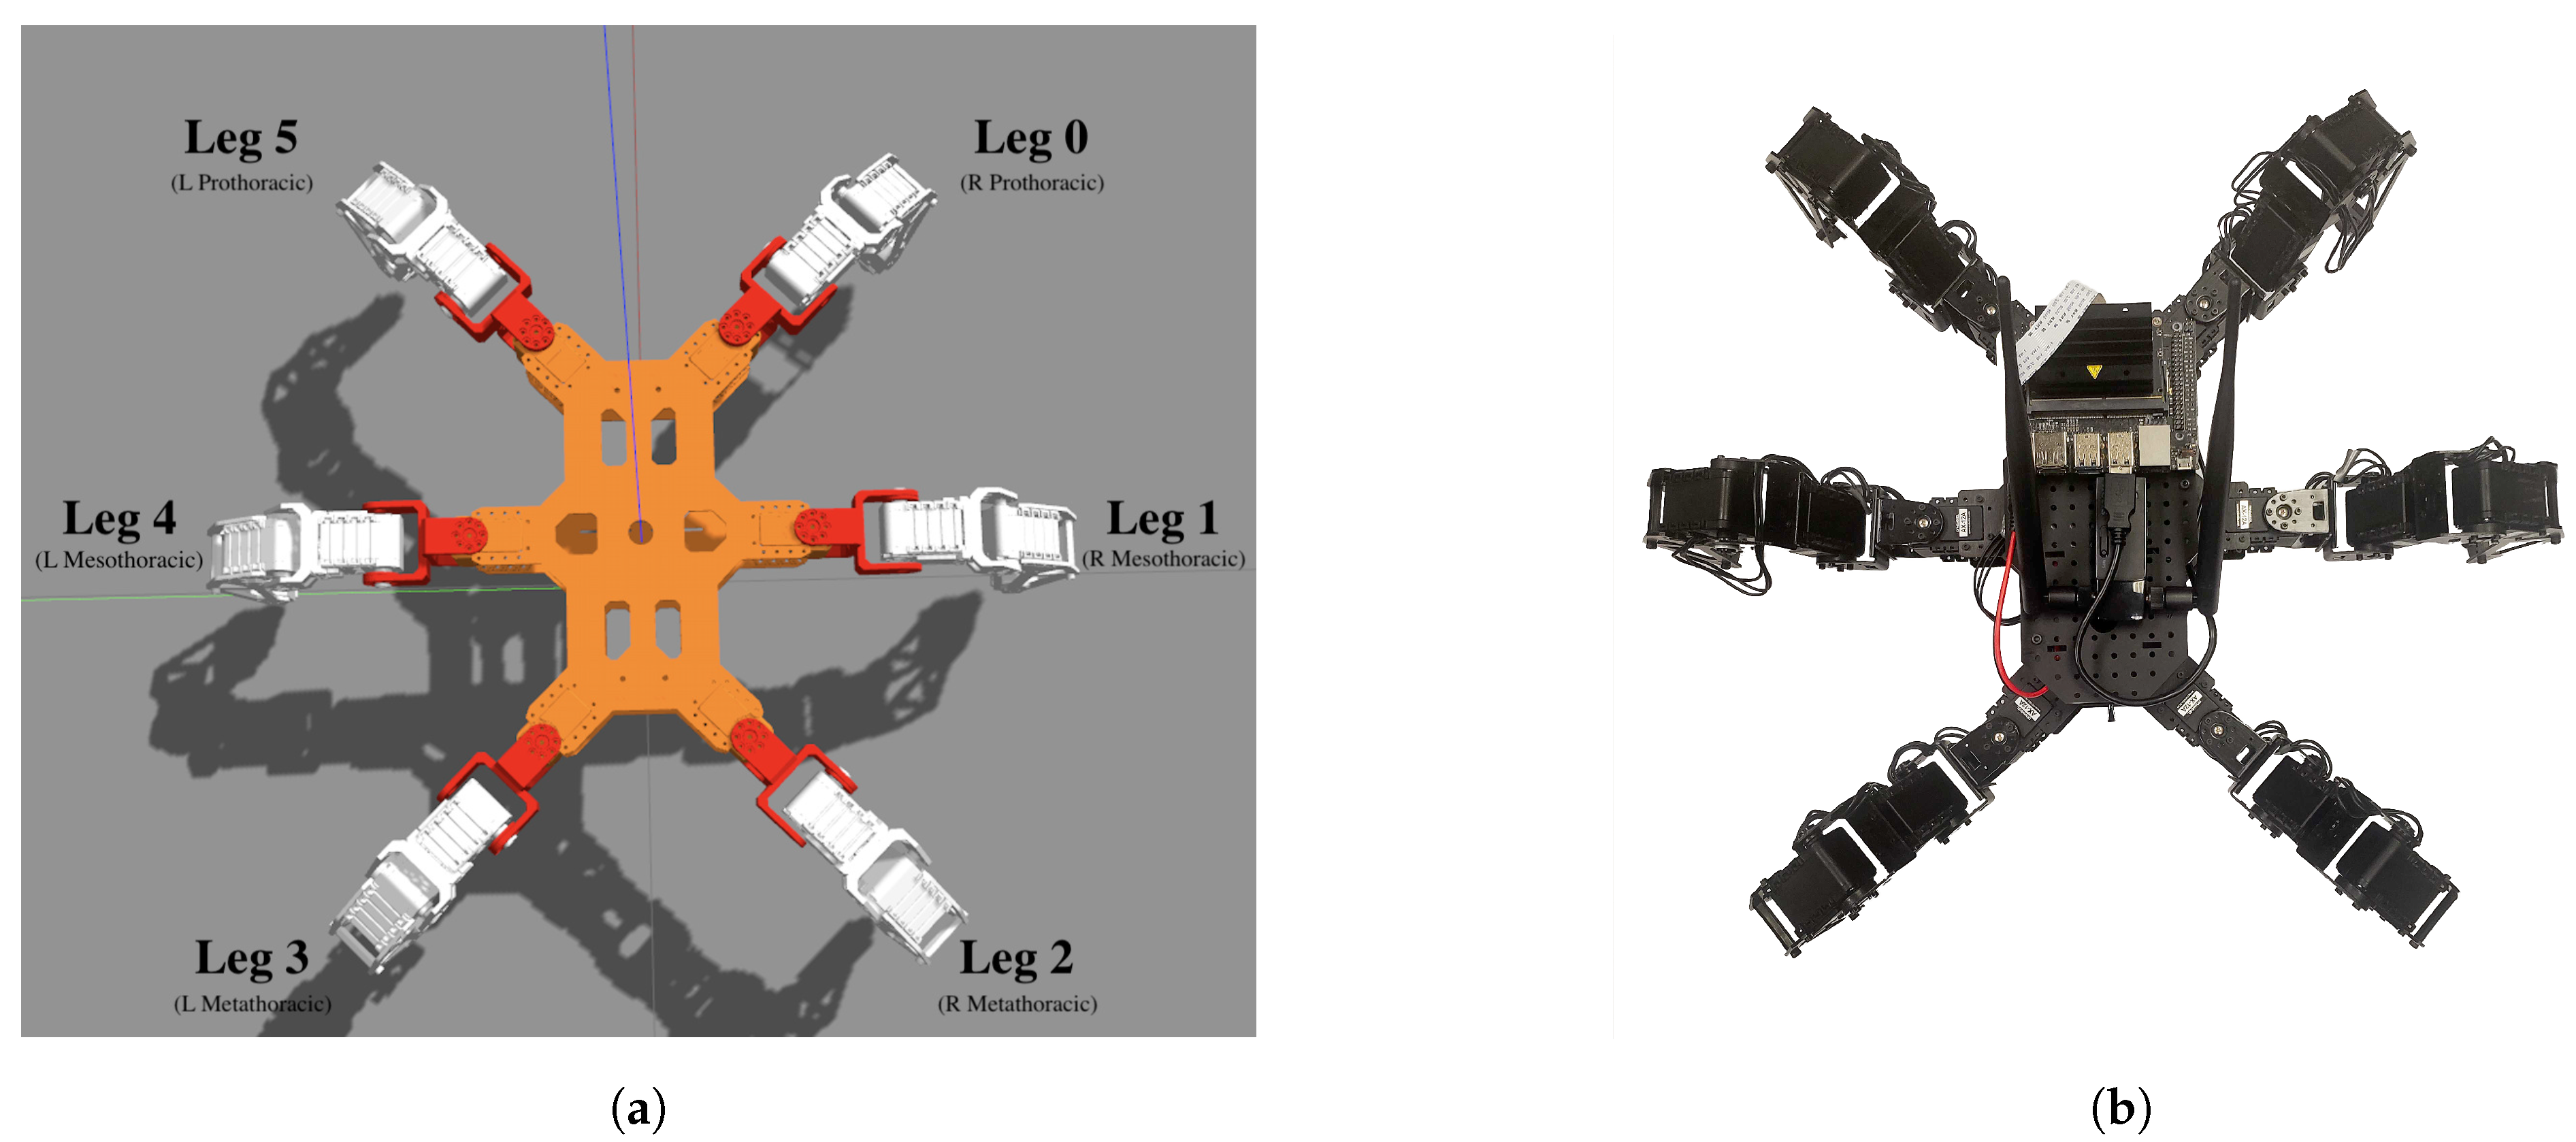 Applied Sciences | Free Full-Text | Telelocomotion—Remotely Operated Legged  Robots | HTML